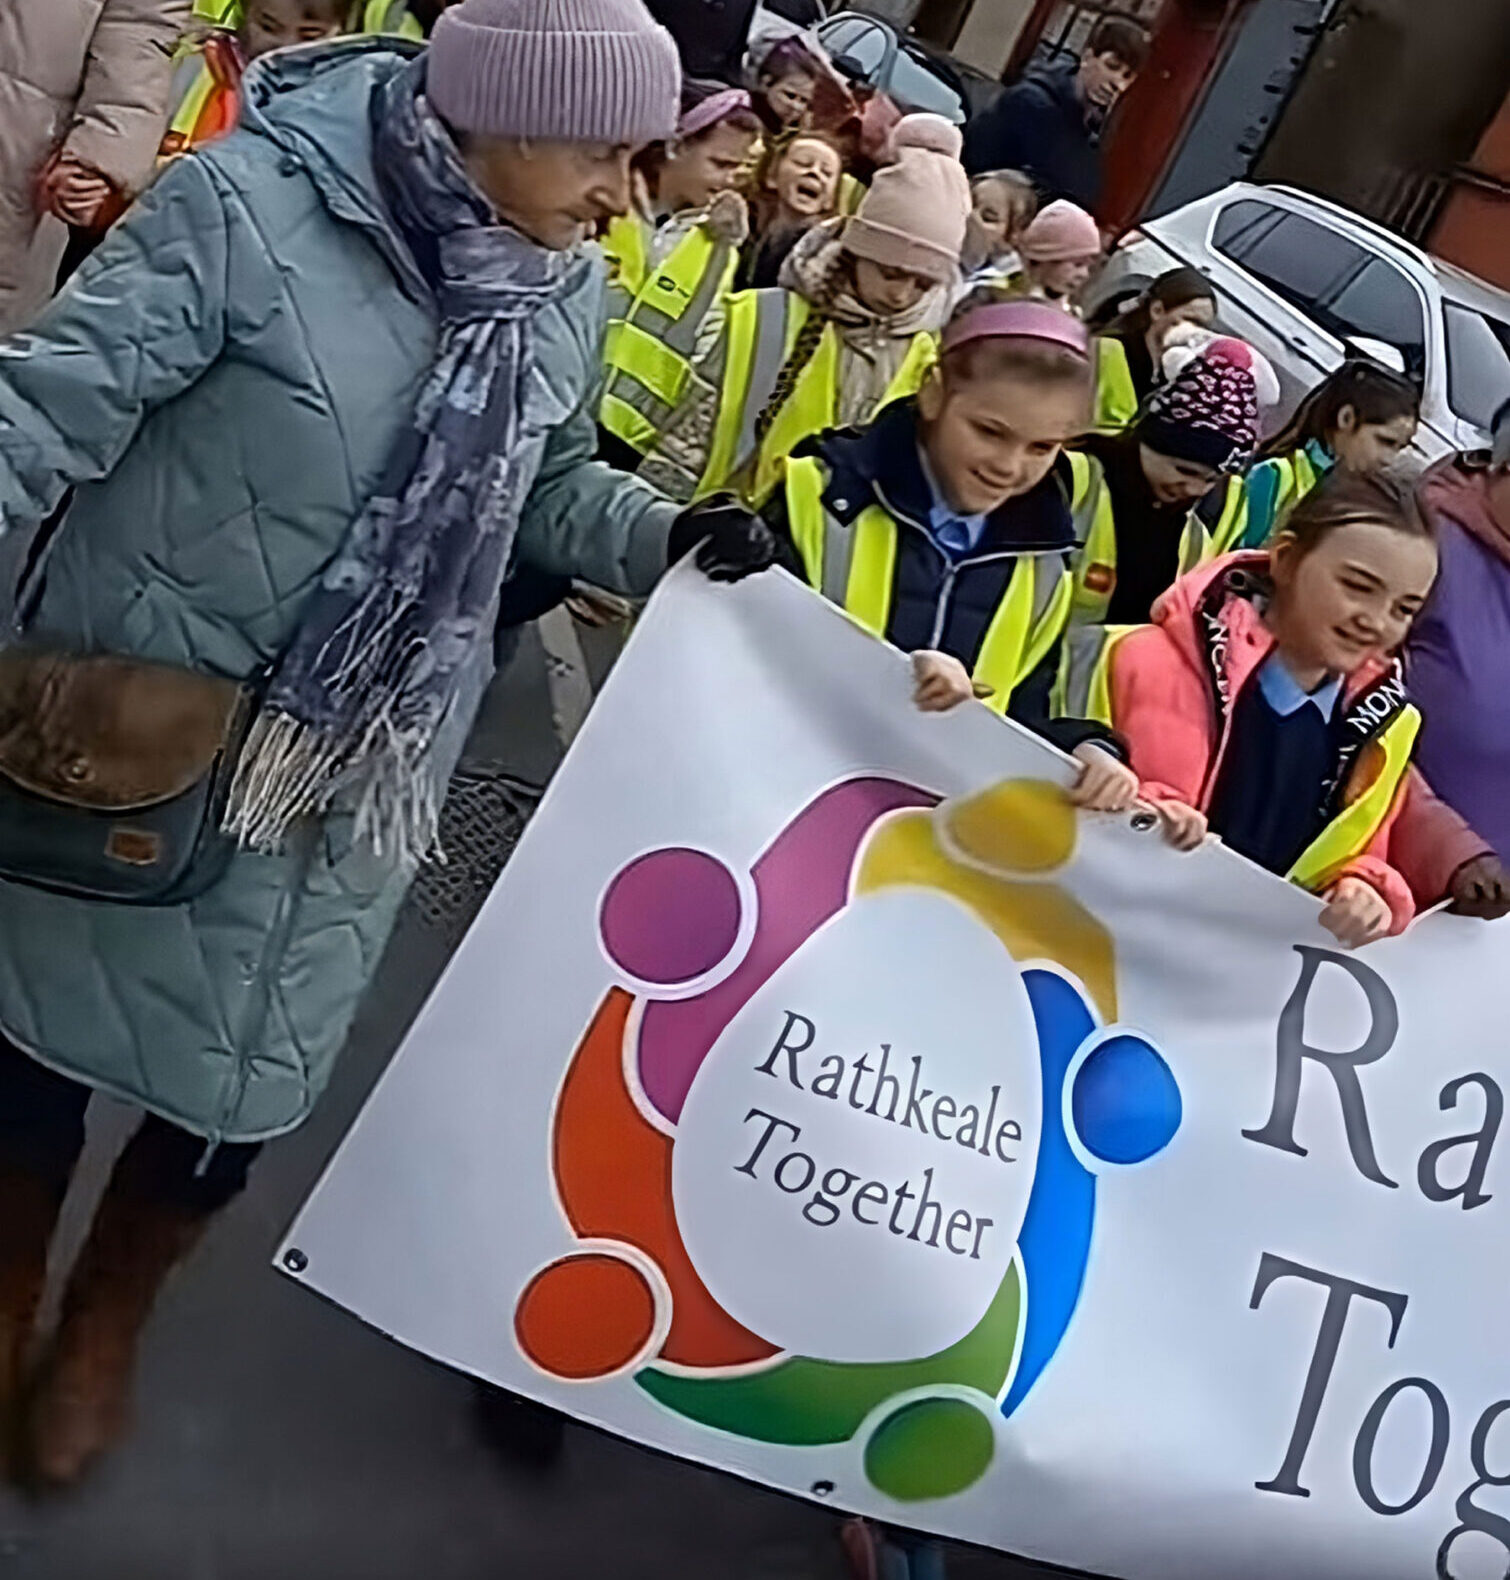 Rathkeale Celebrates International Women's Day embracing equity